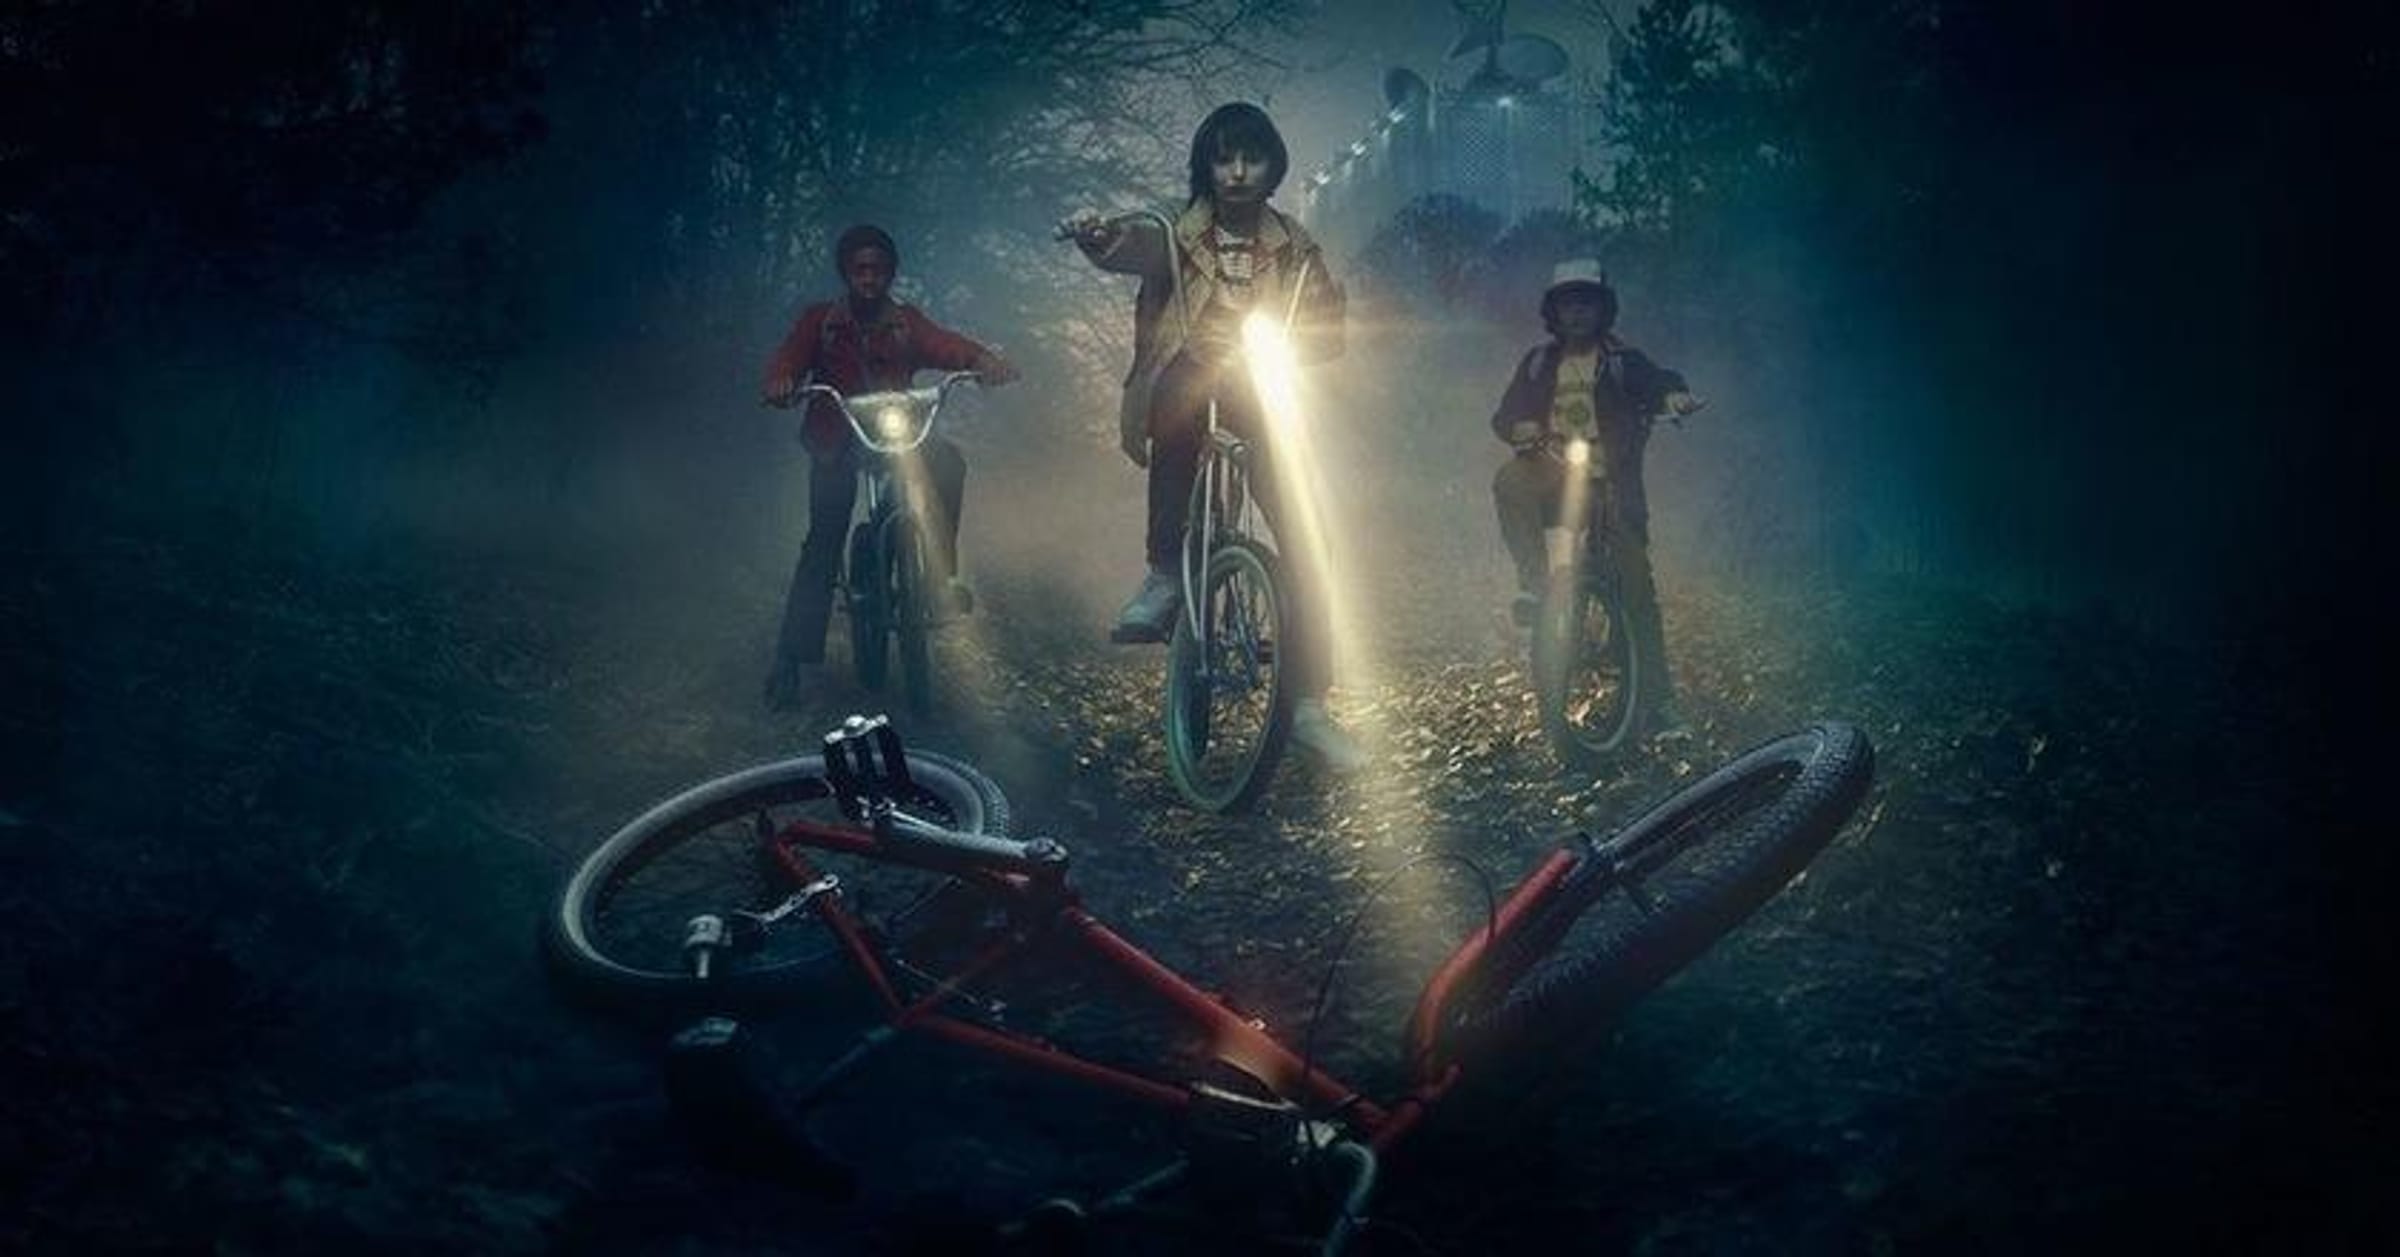 New Theory Predicts a Character Death in 'Stranger Things 4